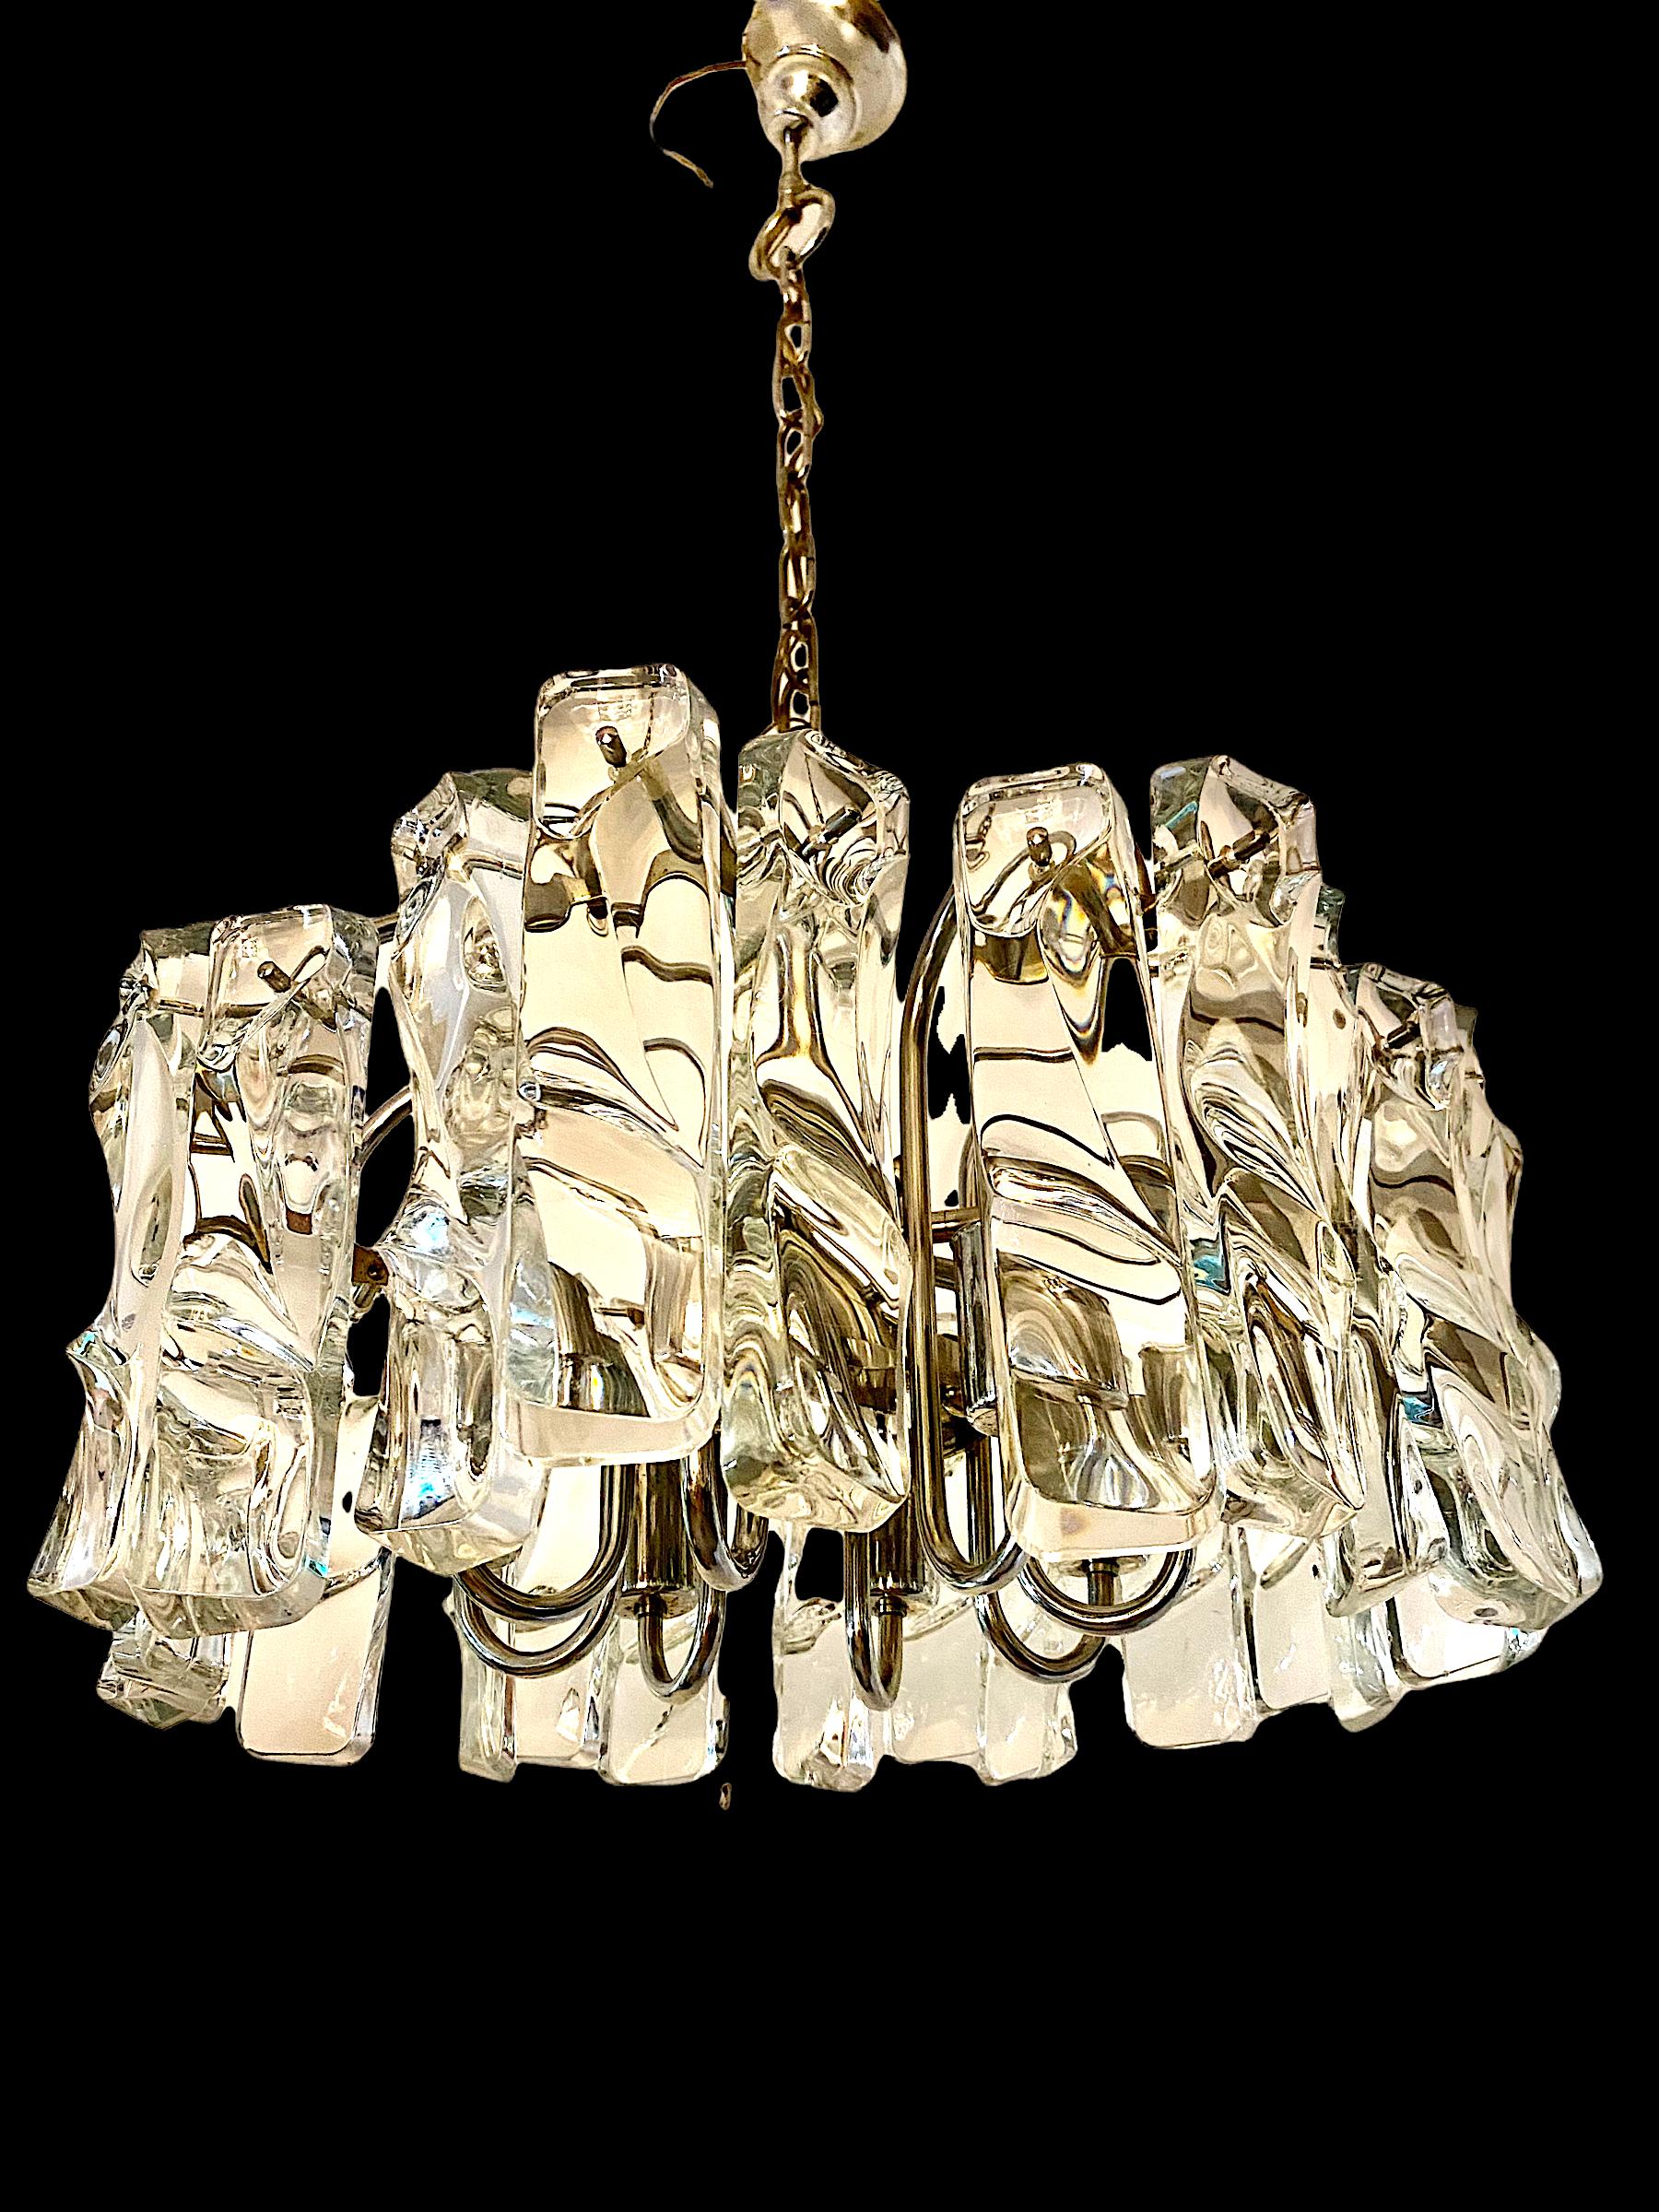 Exceptional JT Kalmar chandelier with large ice frost glass with chrome structure. The Design and the quality of the glass make this piece the best of the Austrian Design .
This unique Kalmar chandelier in ice frost glass are exceptional.

This